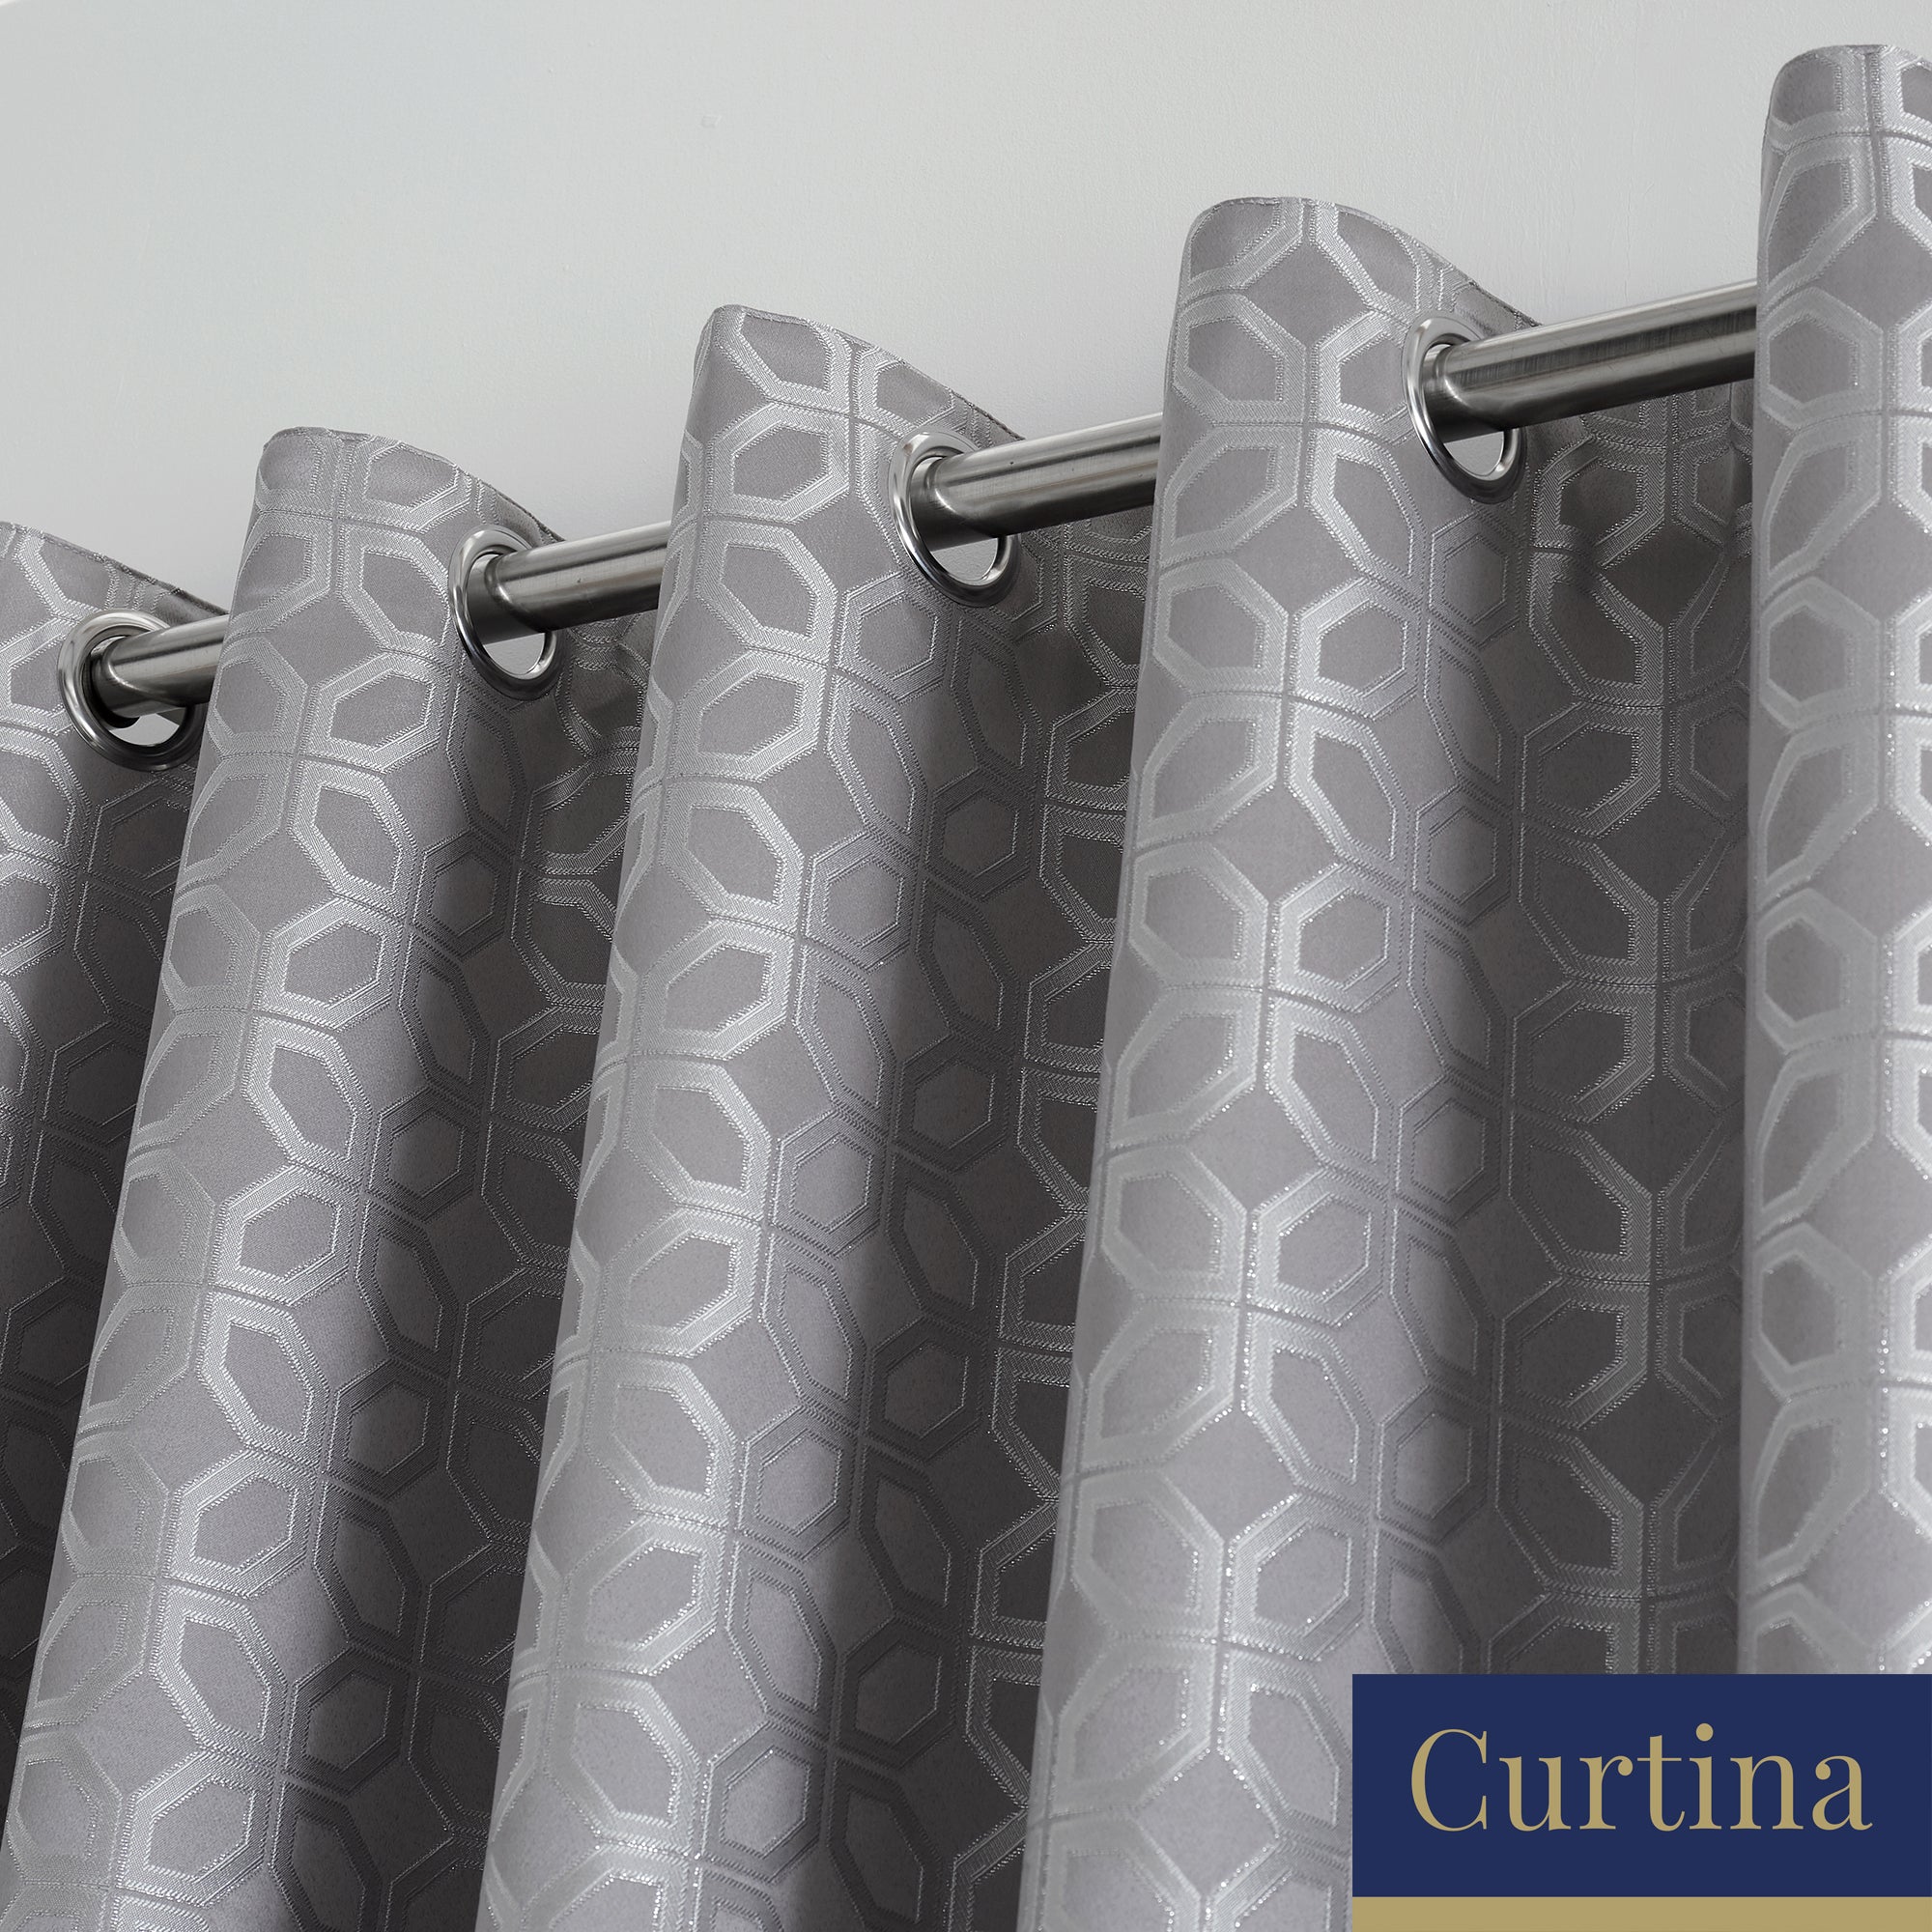 Oriental Squares - Geometric Metallic Jacquard Eyelet Curtains in Silver - By Curtina